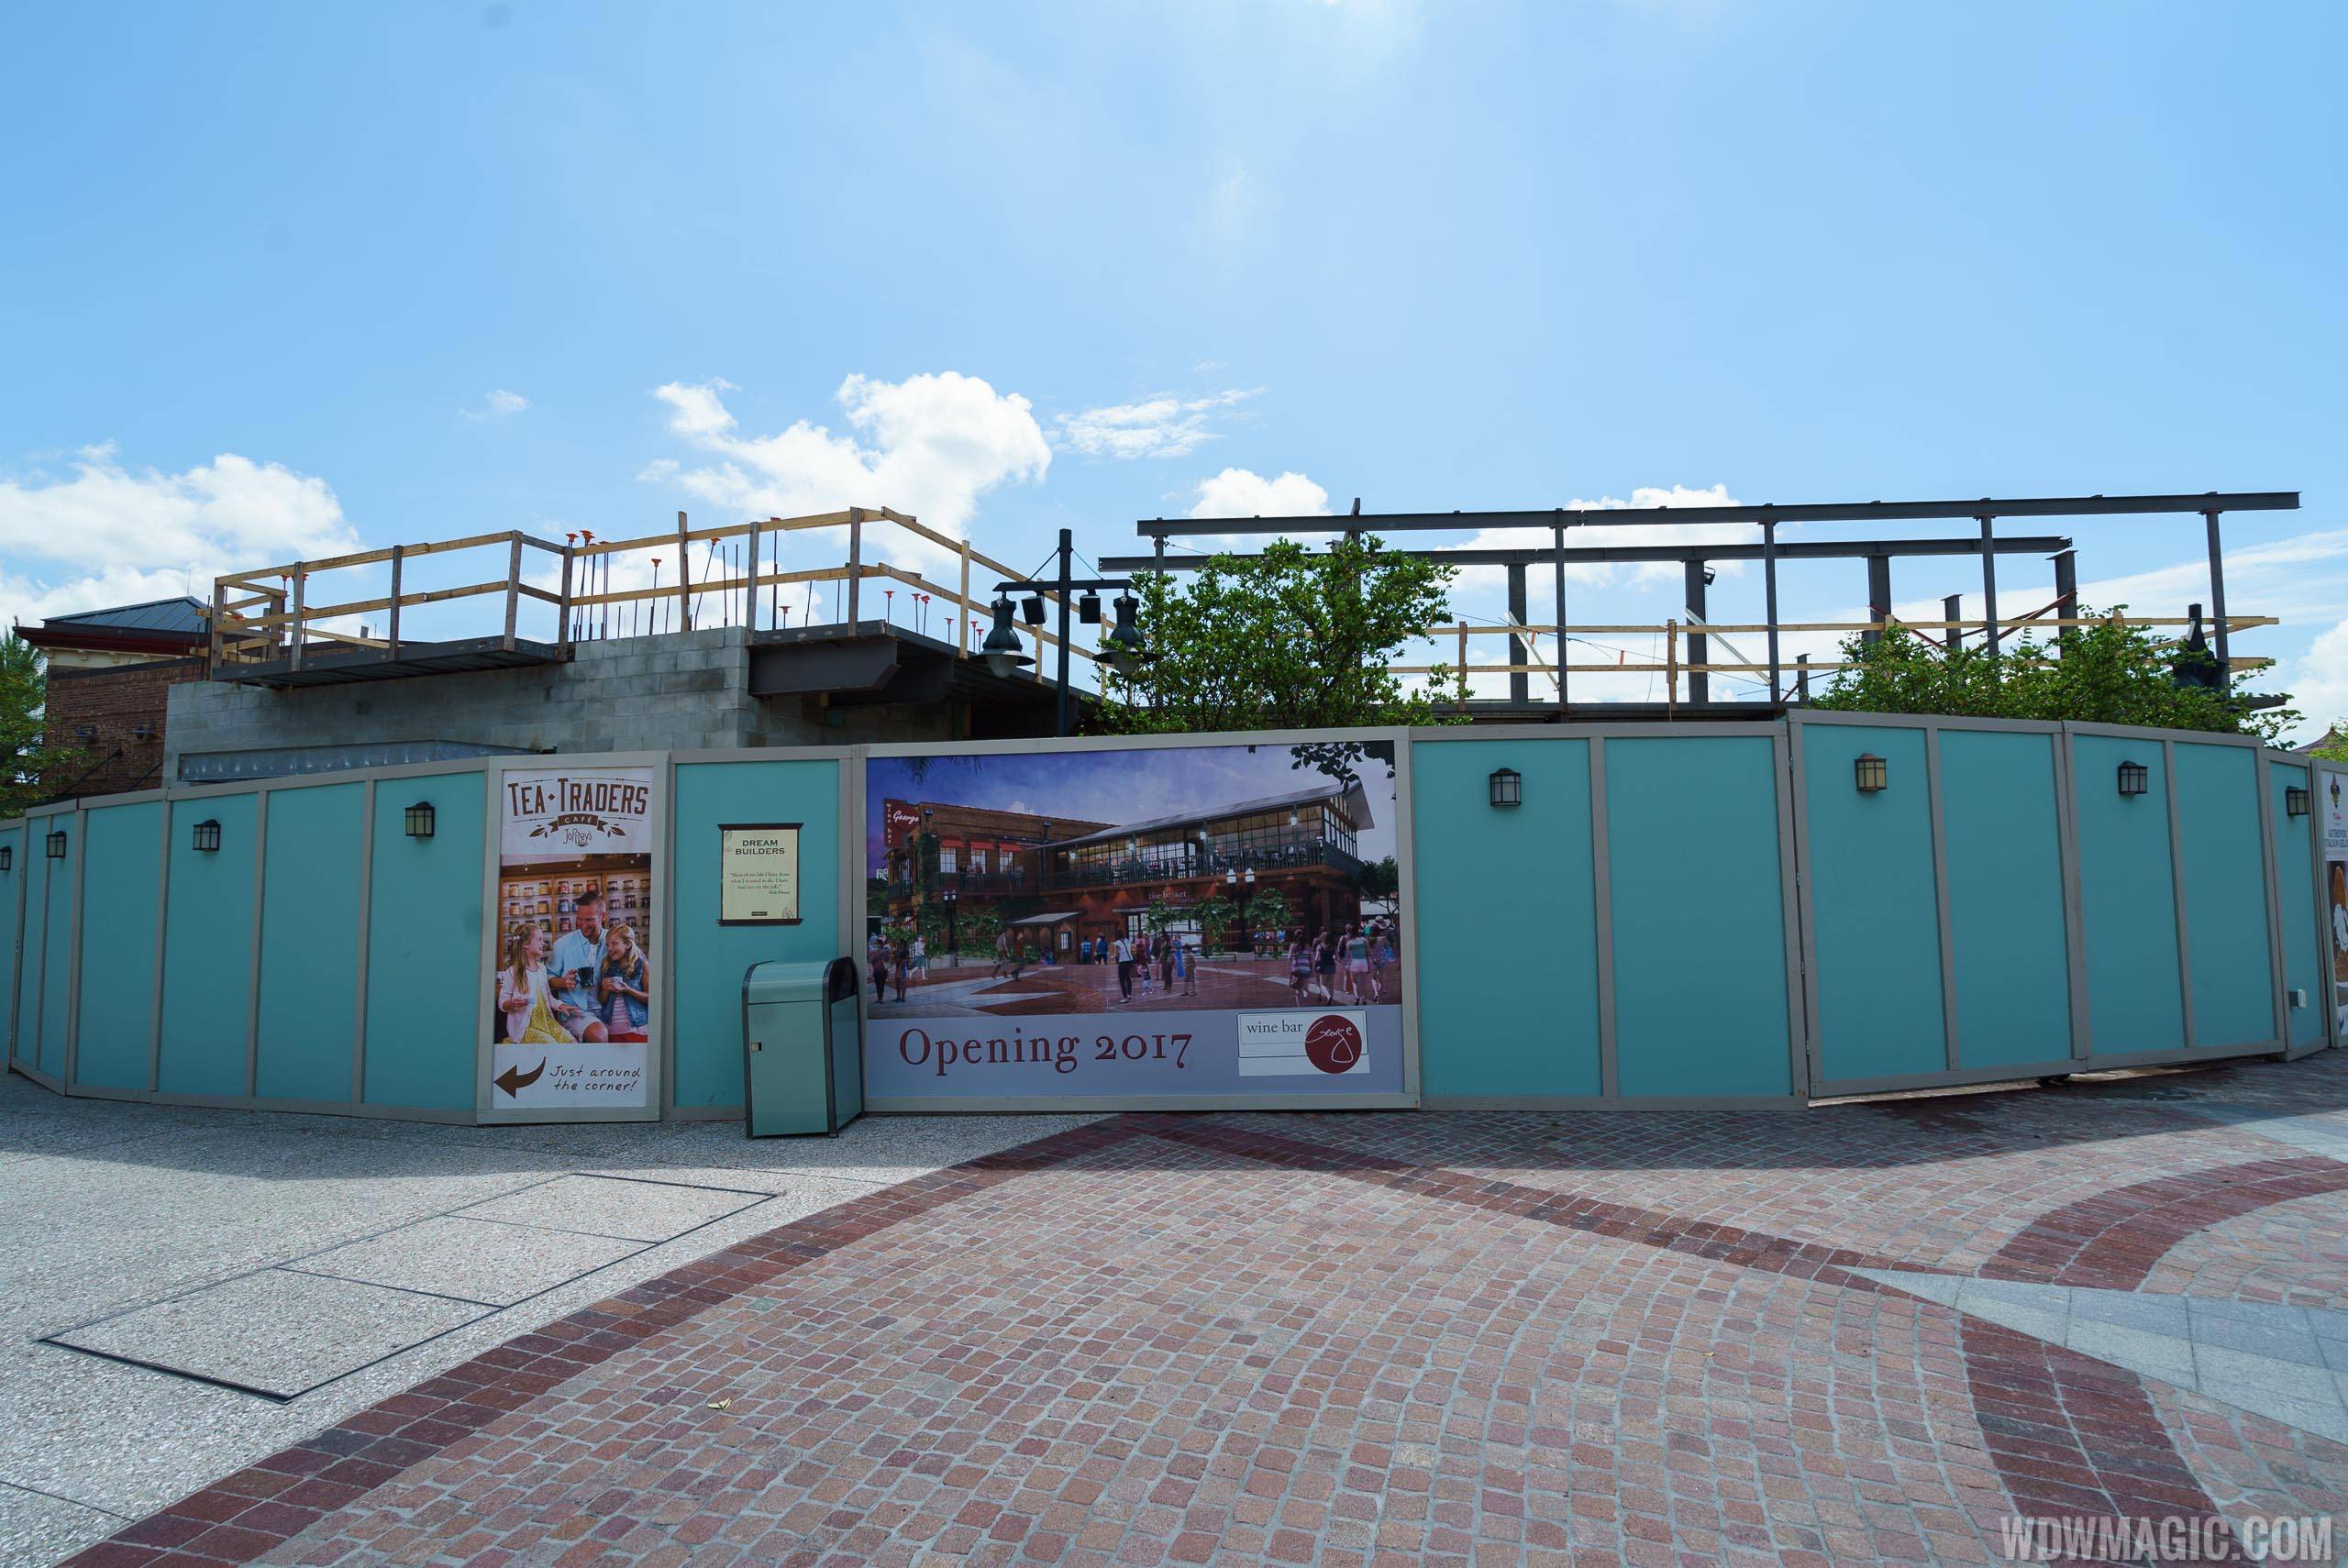 PHOTOS - Latest look at Wine Bar George under construction at Disney Springs